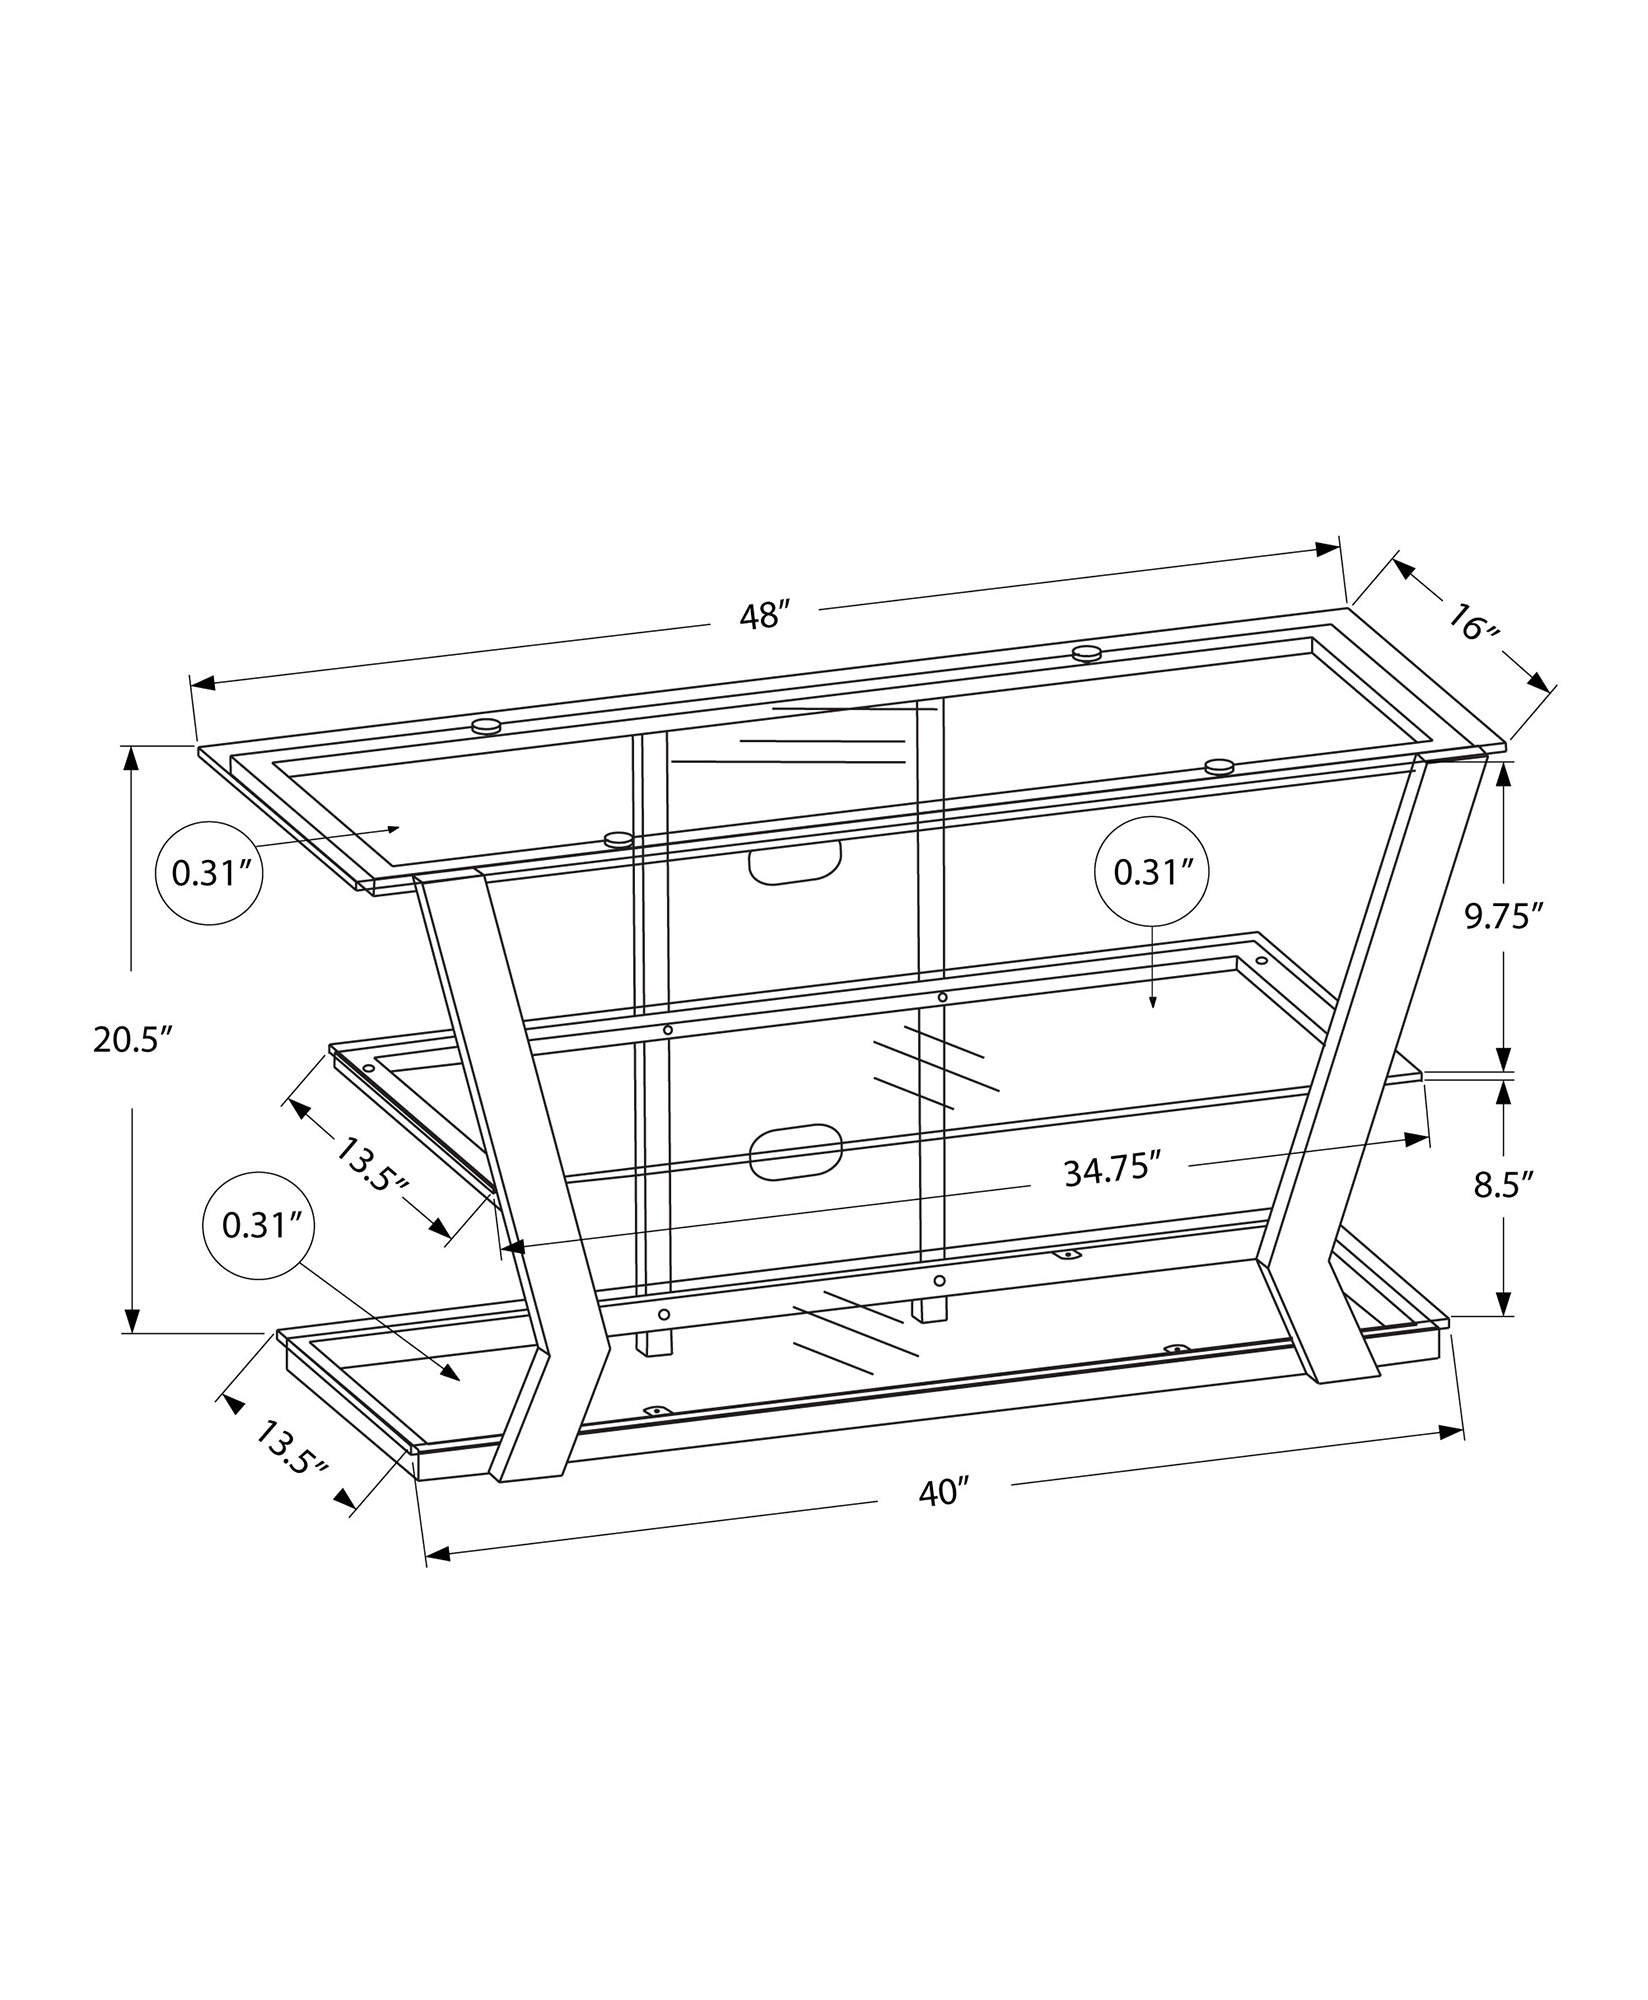 TV STAND - 48"L / BLACK METAL WITH TEMPERED GLASS